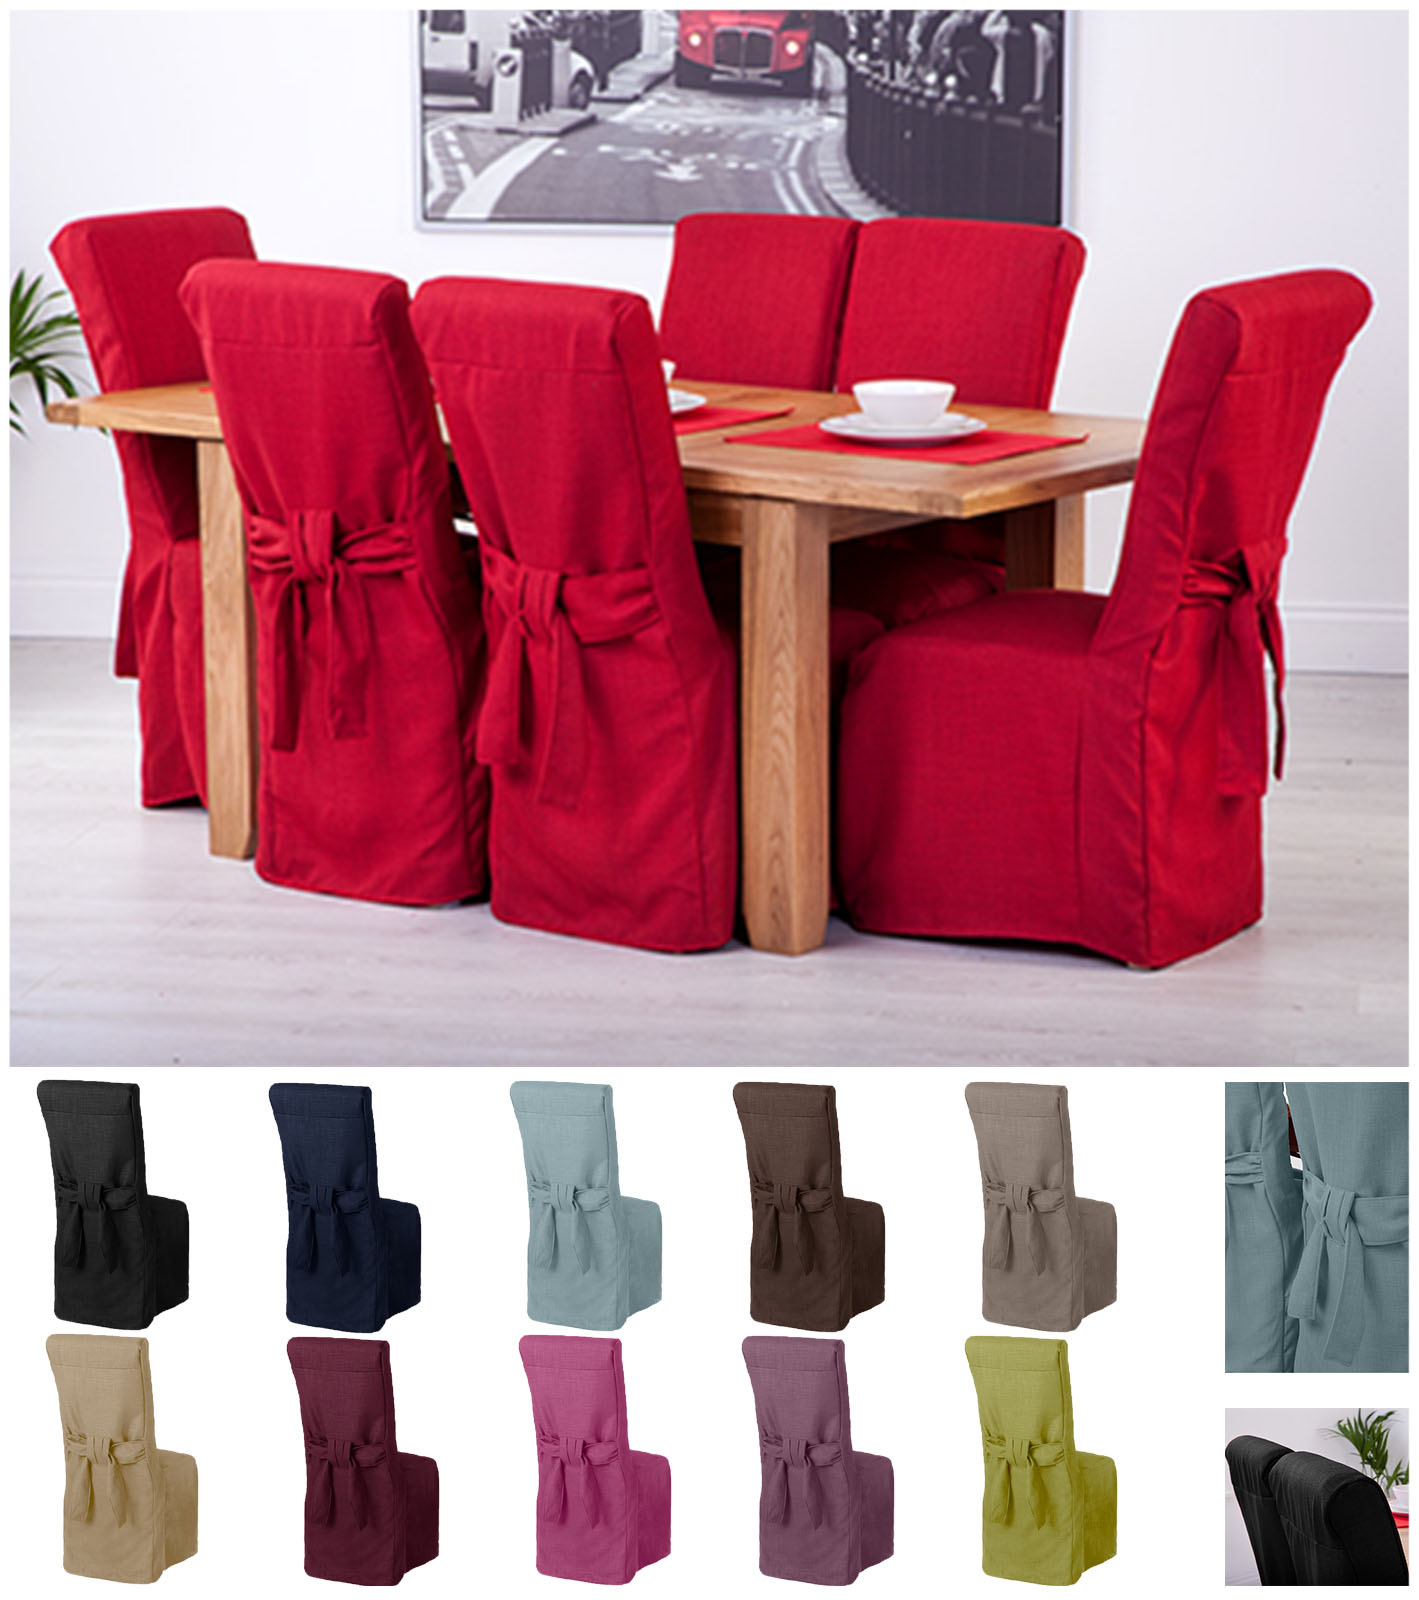 Loose Covers For Dining Room Chairs Uk • Faucet Ideas Site